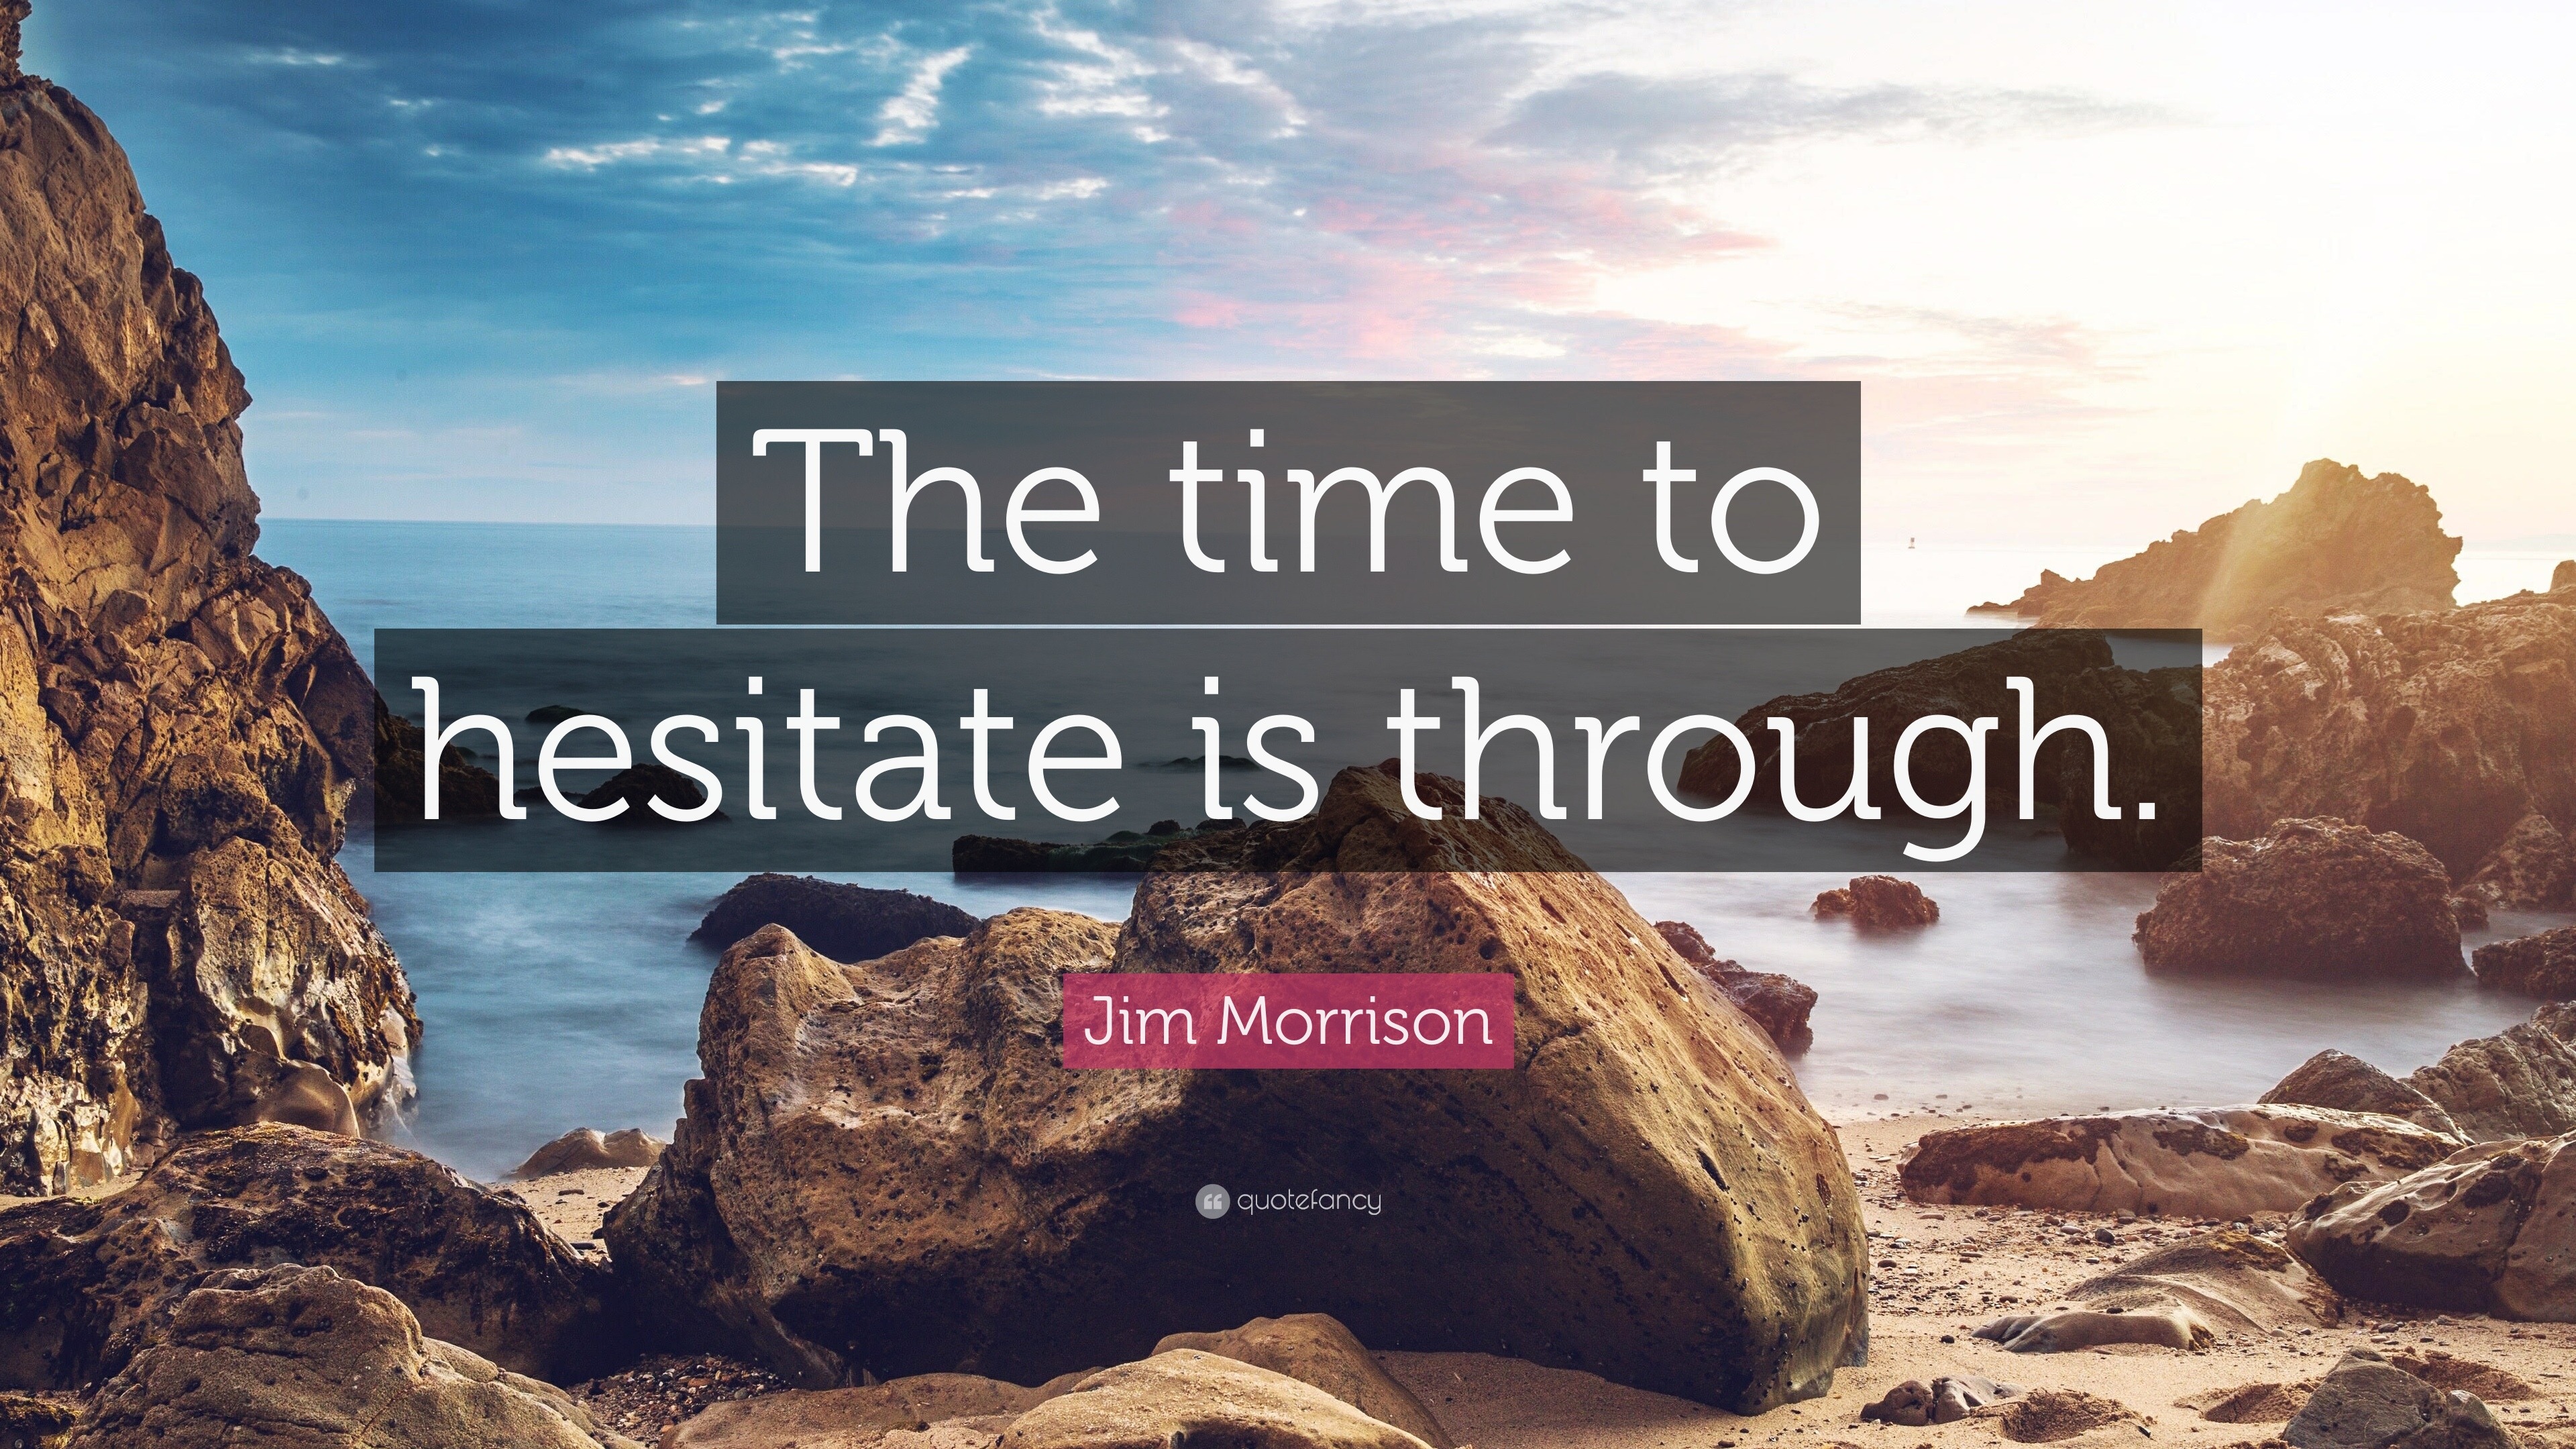 Jim Morrison Quote: “The time to hesitate is through.”